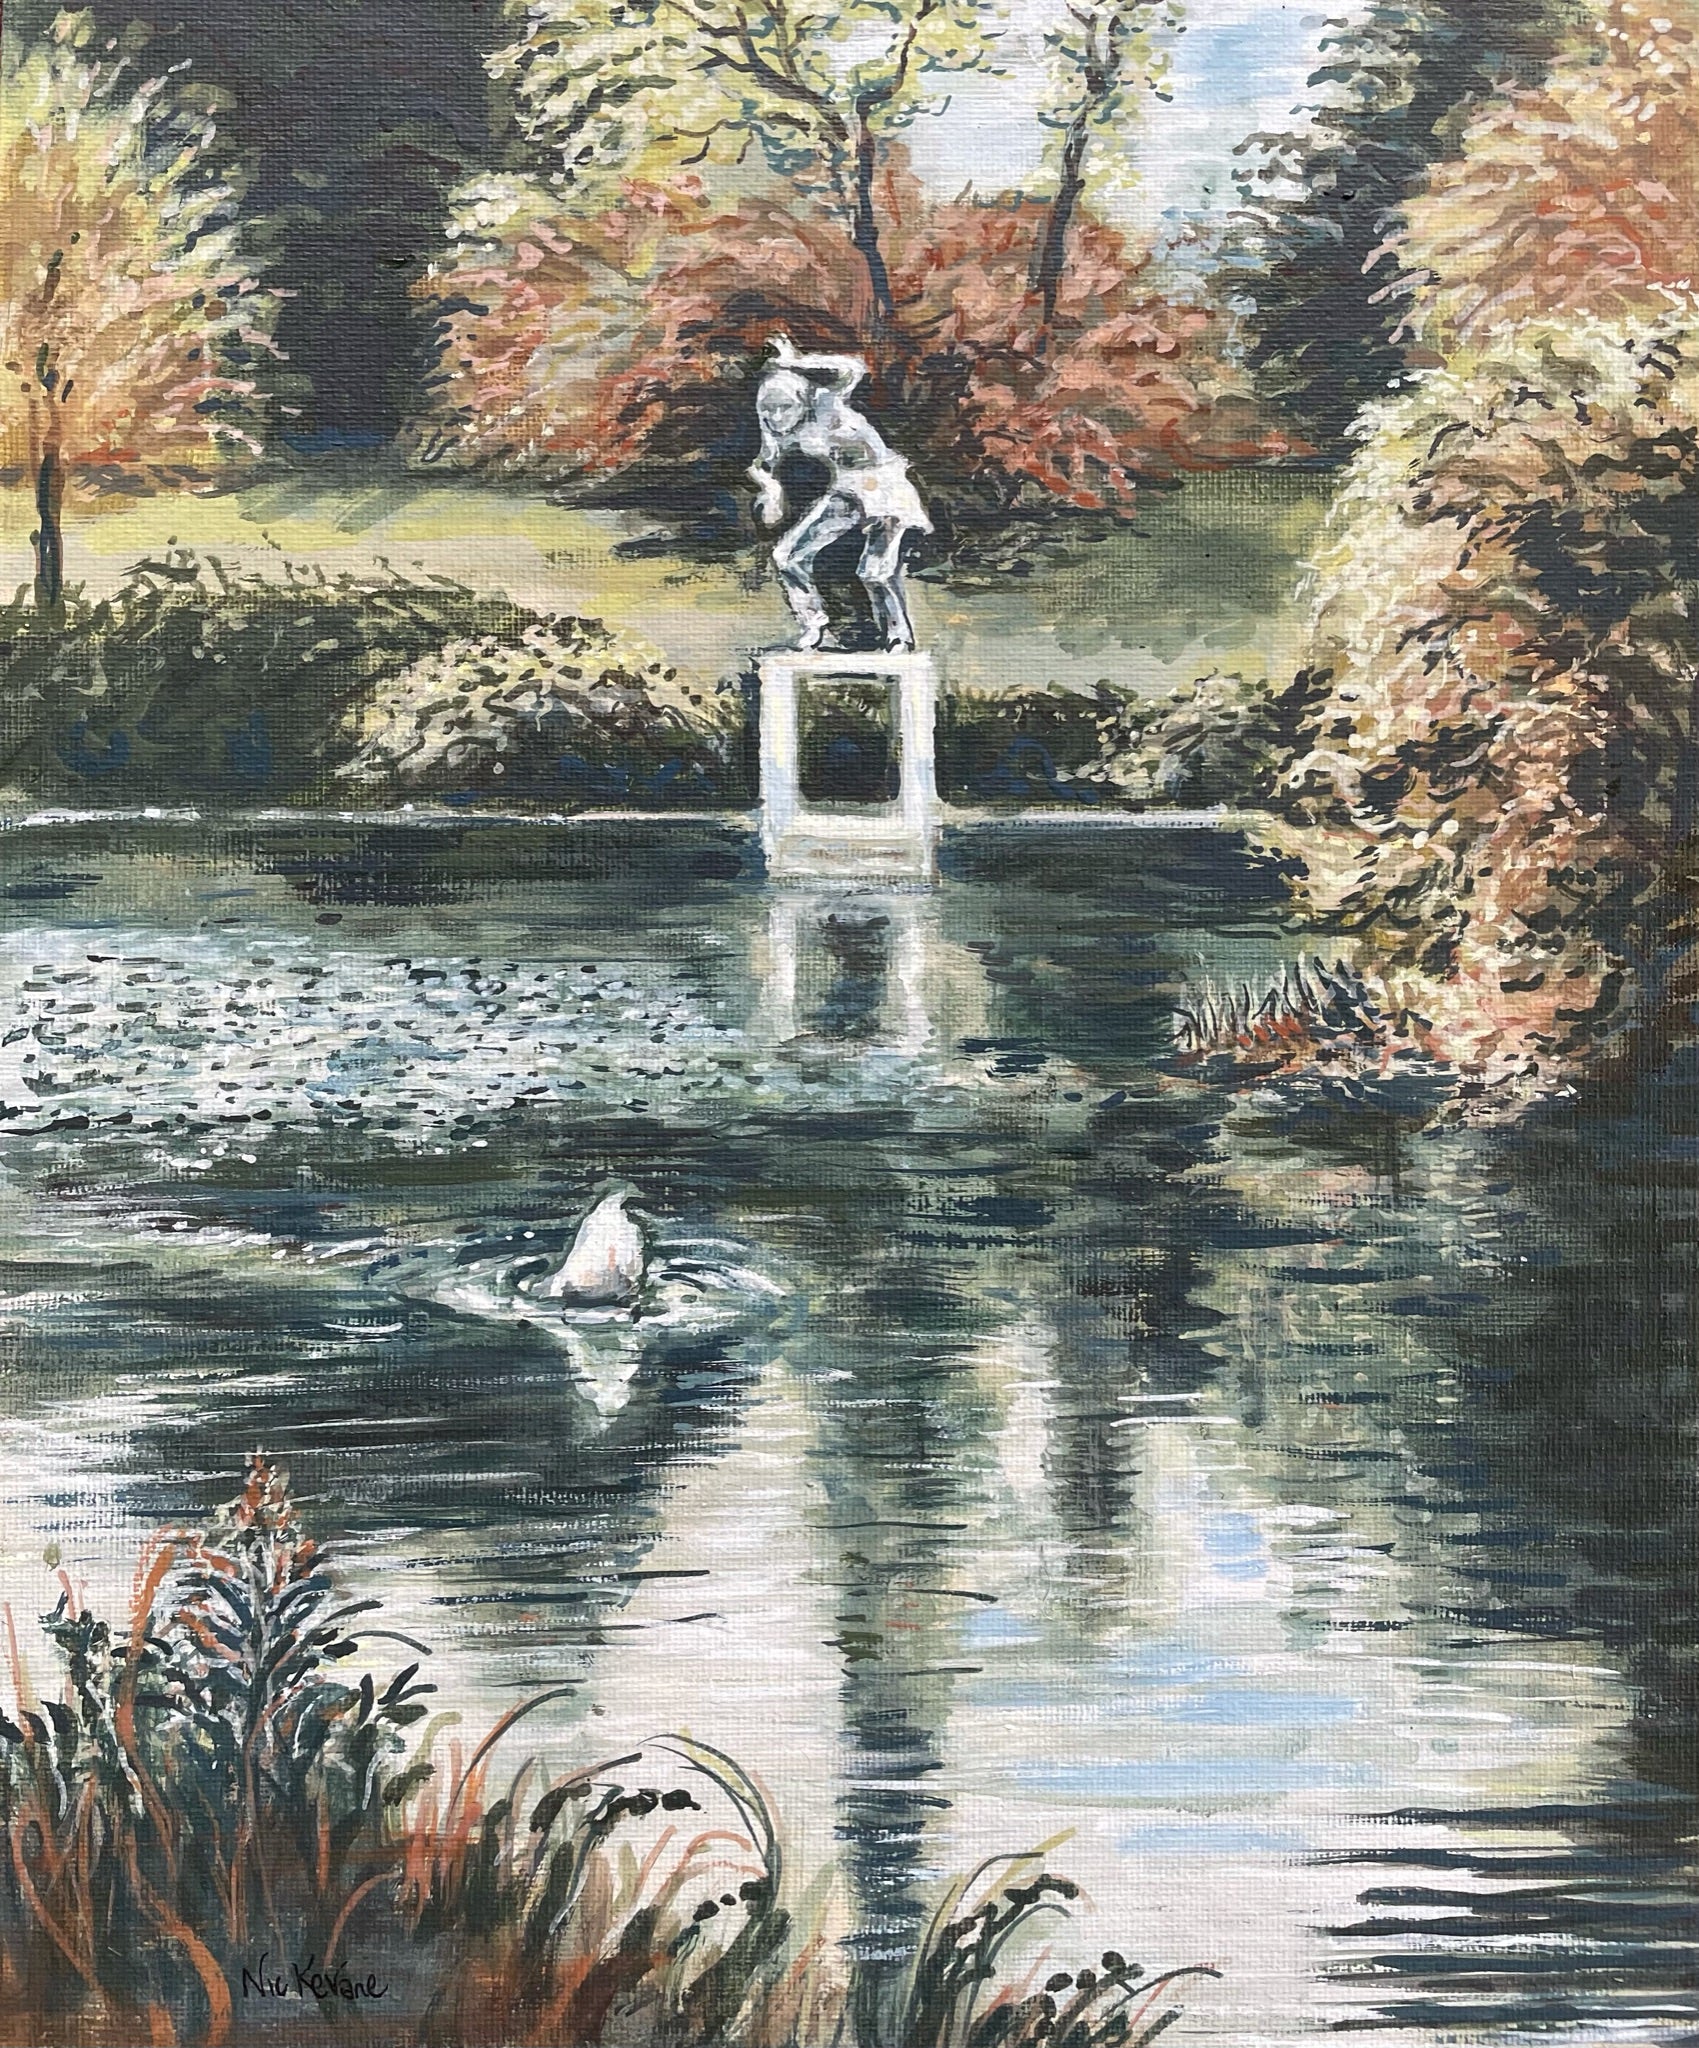 Diana and the swan  A landscape painting of a corner of the Yorkshire Sculpture Park